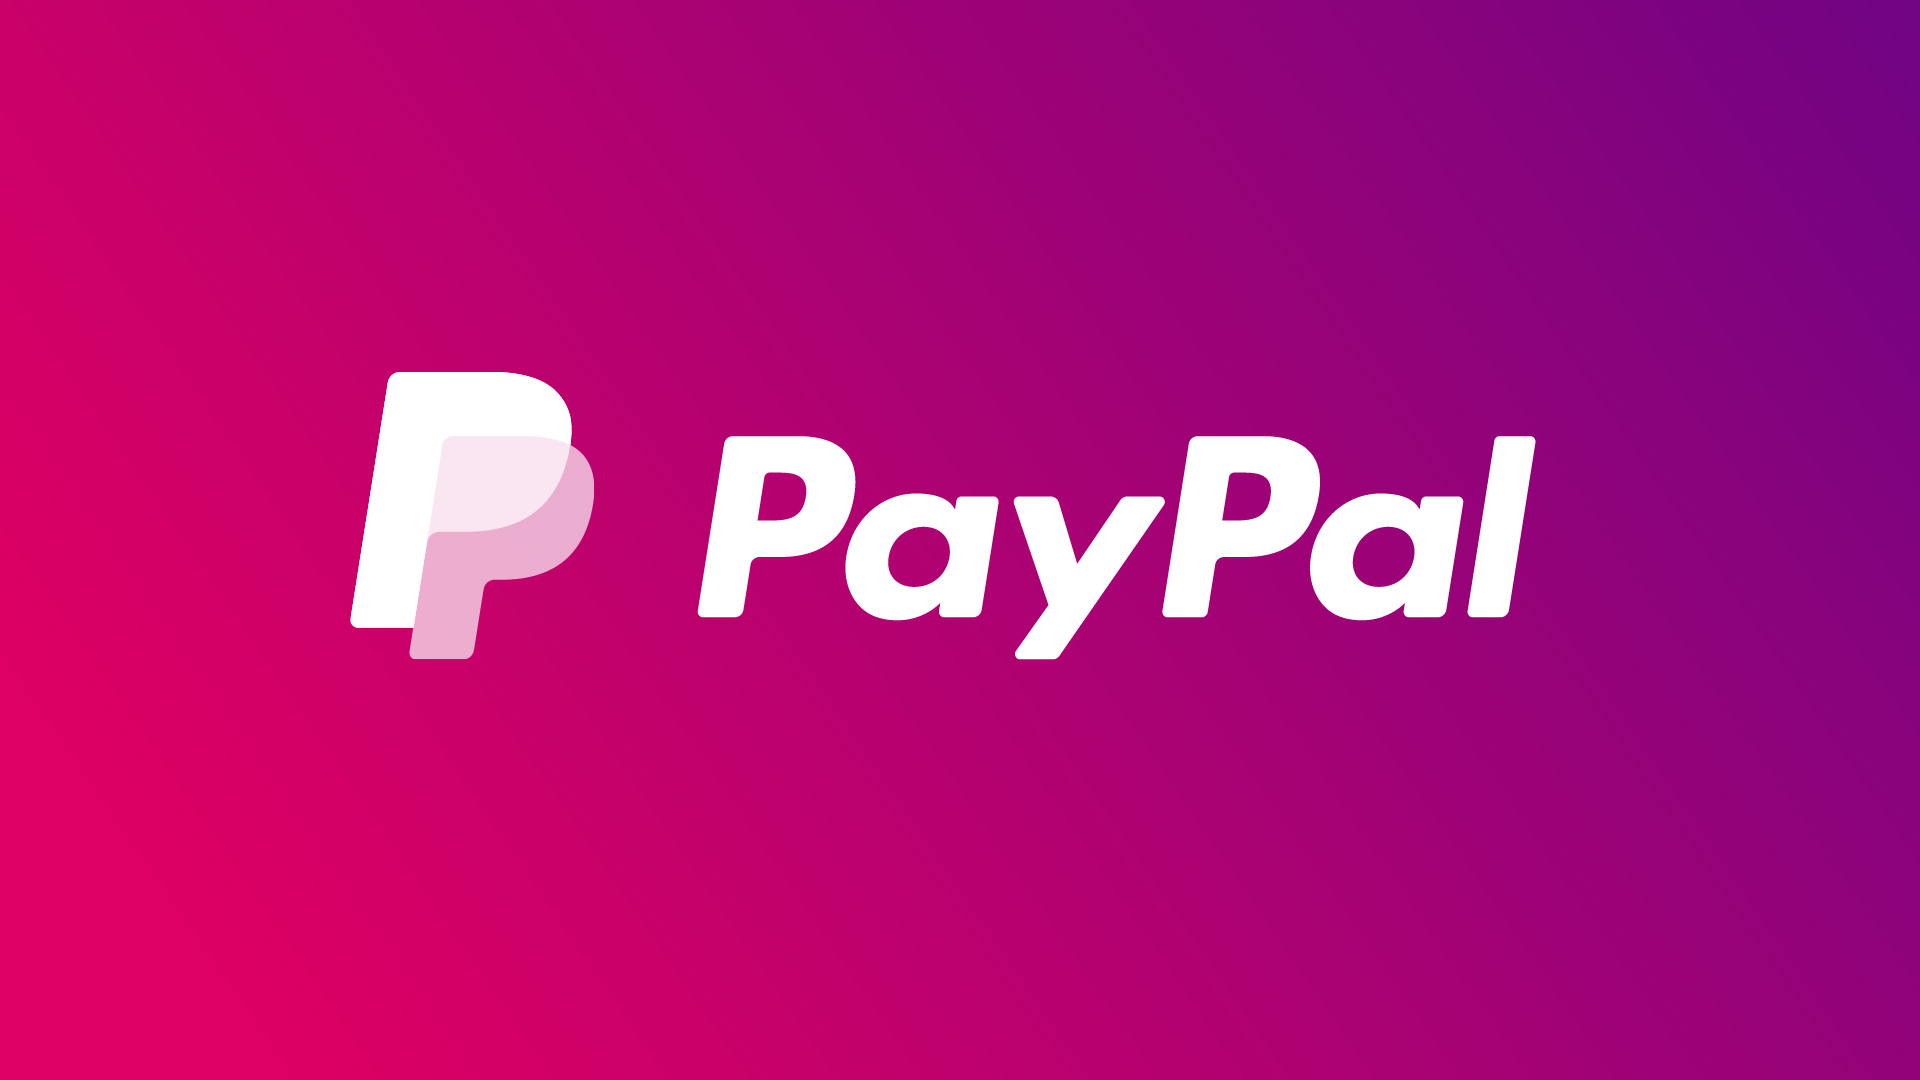 technology, paypal